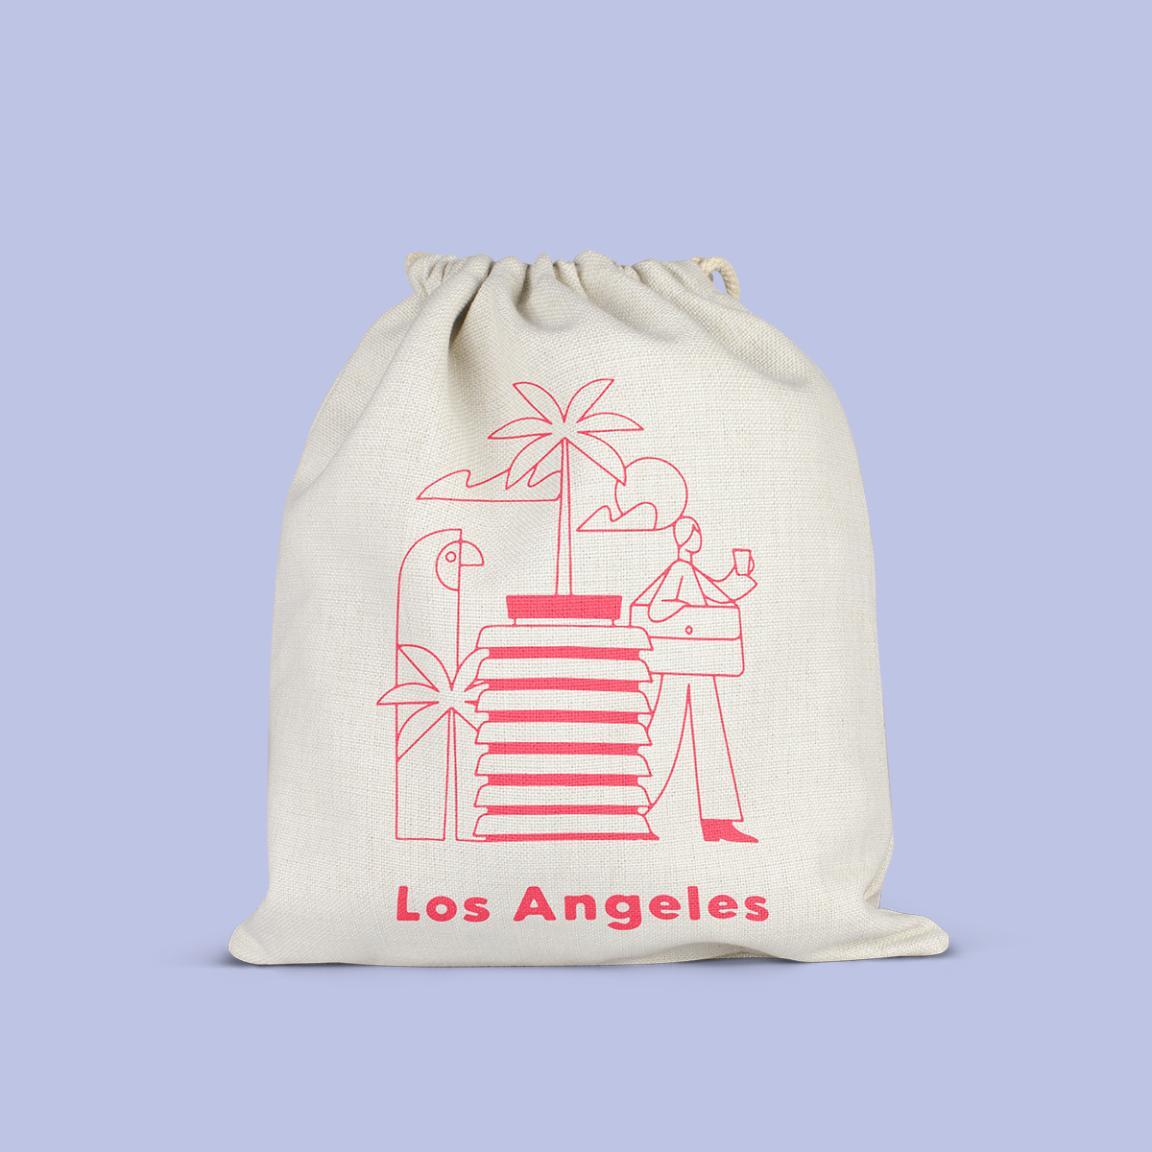 Custom Drawstring Bags  The Best Way To Make Your Brand Part Of The  Lifestyle of the users  ProImprint Blog  Tips To Choose Your Promotional  Products